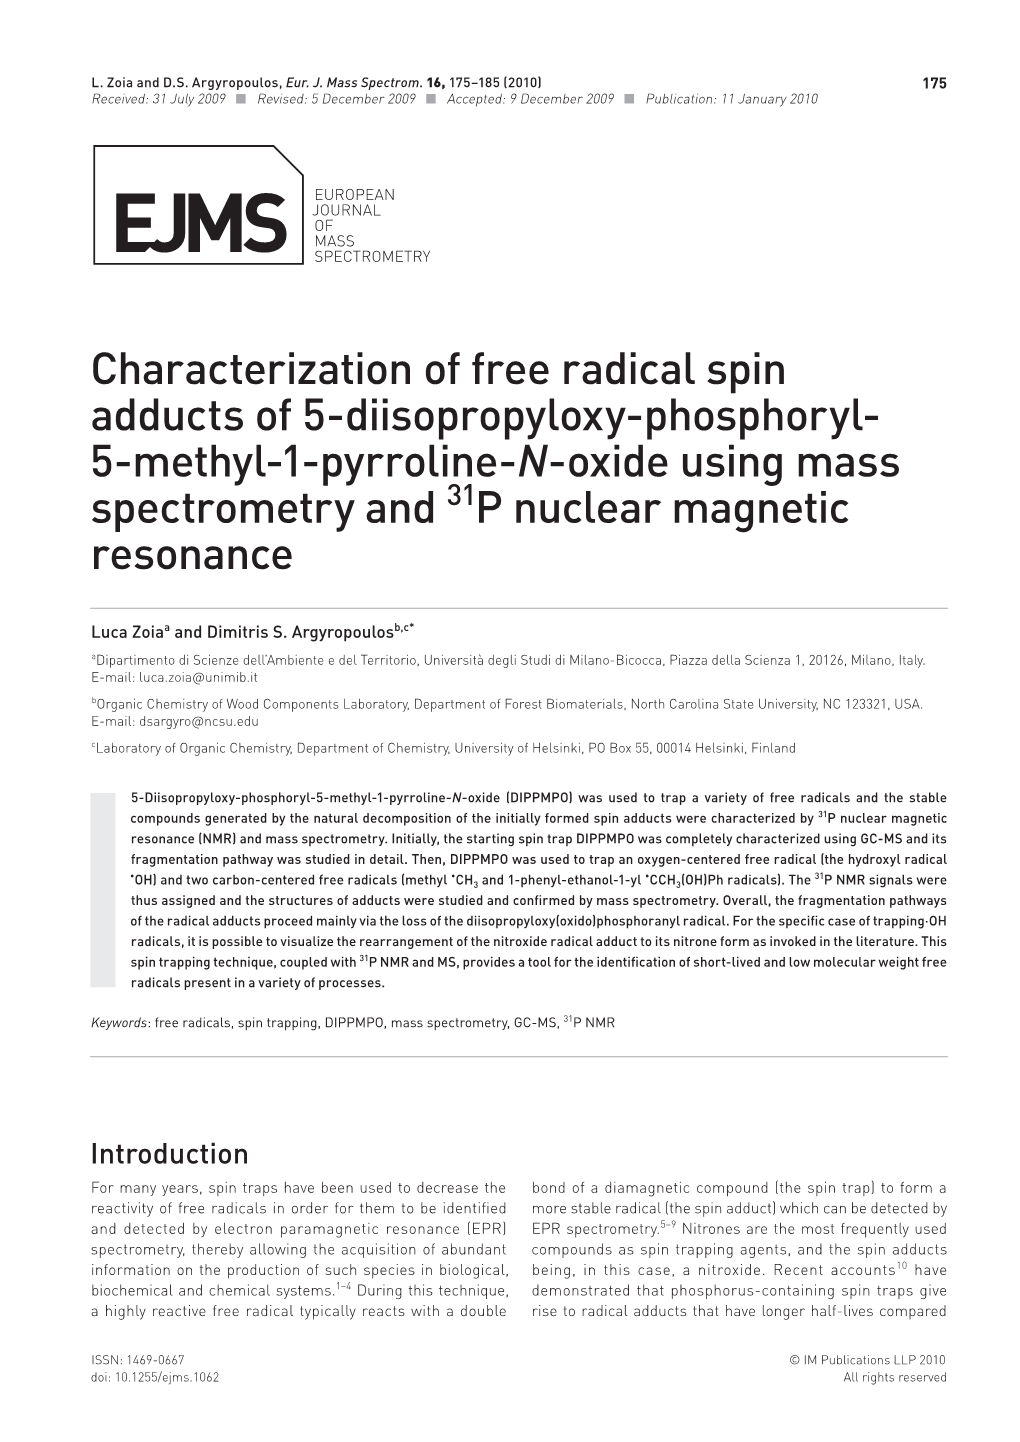 Characterization of Free Radical Spin Adducts of 5-Diisopropyloxy